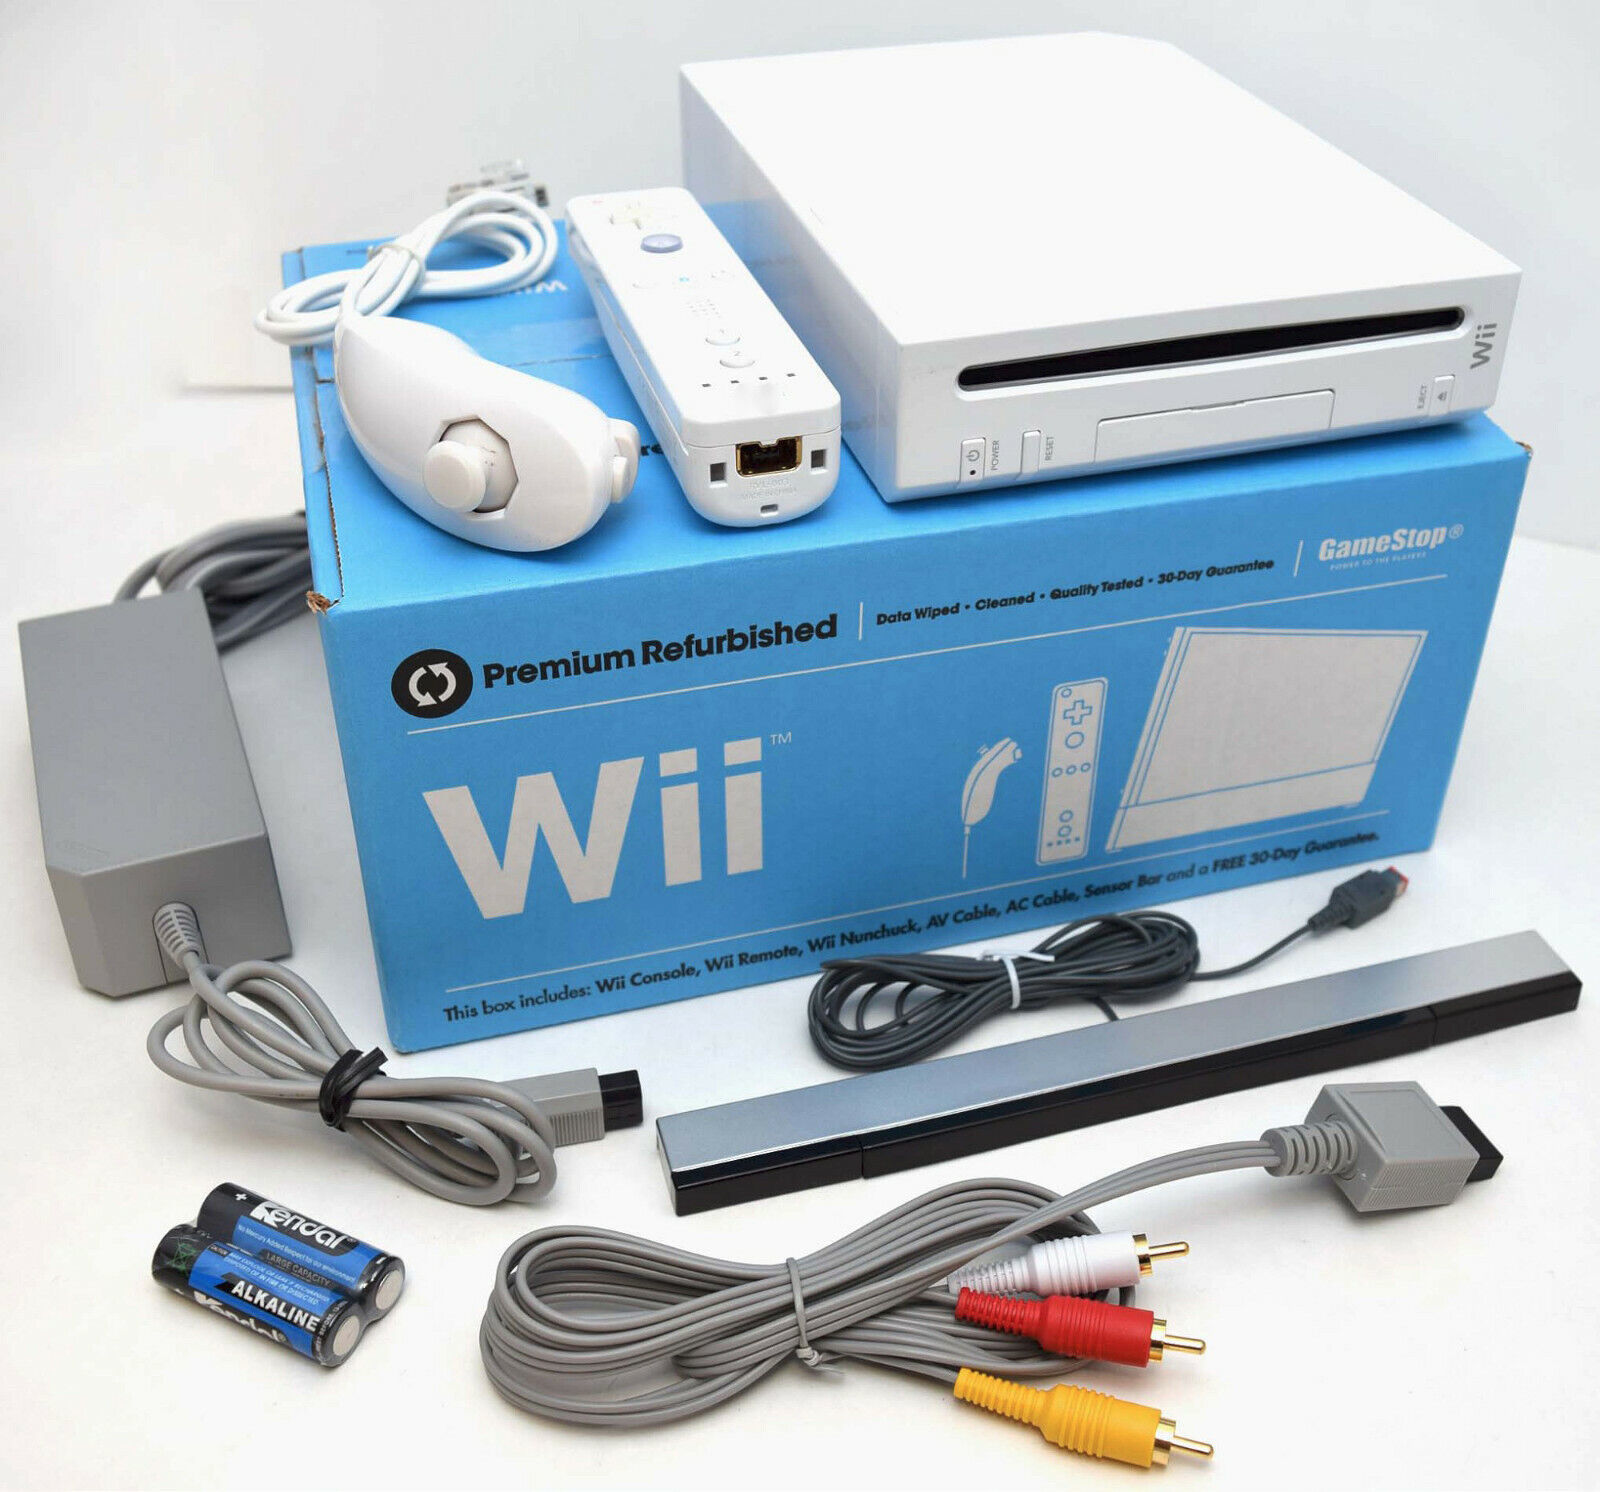 Nintendo Wii WHITE Video Game Console System Bundle Online RVL-001 GameCube Port - $112.81